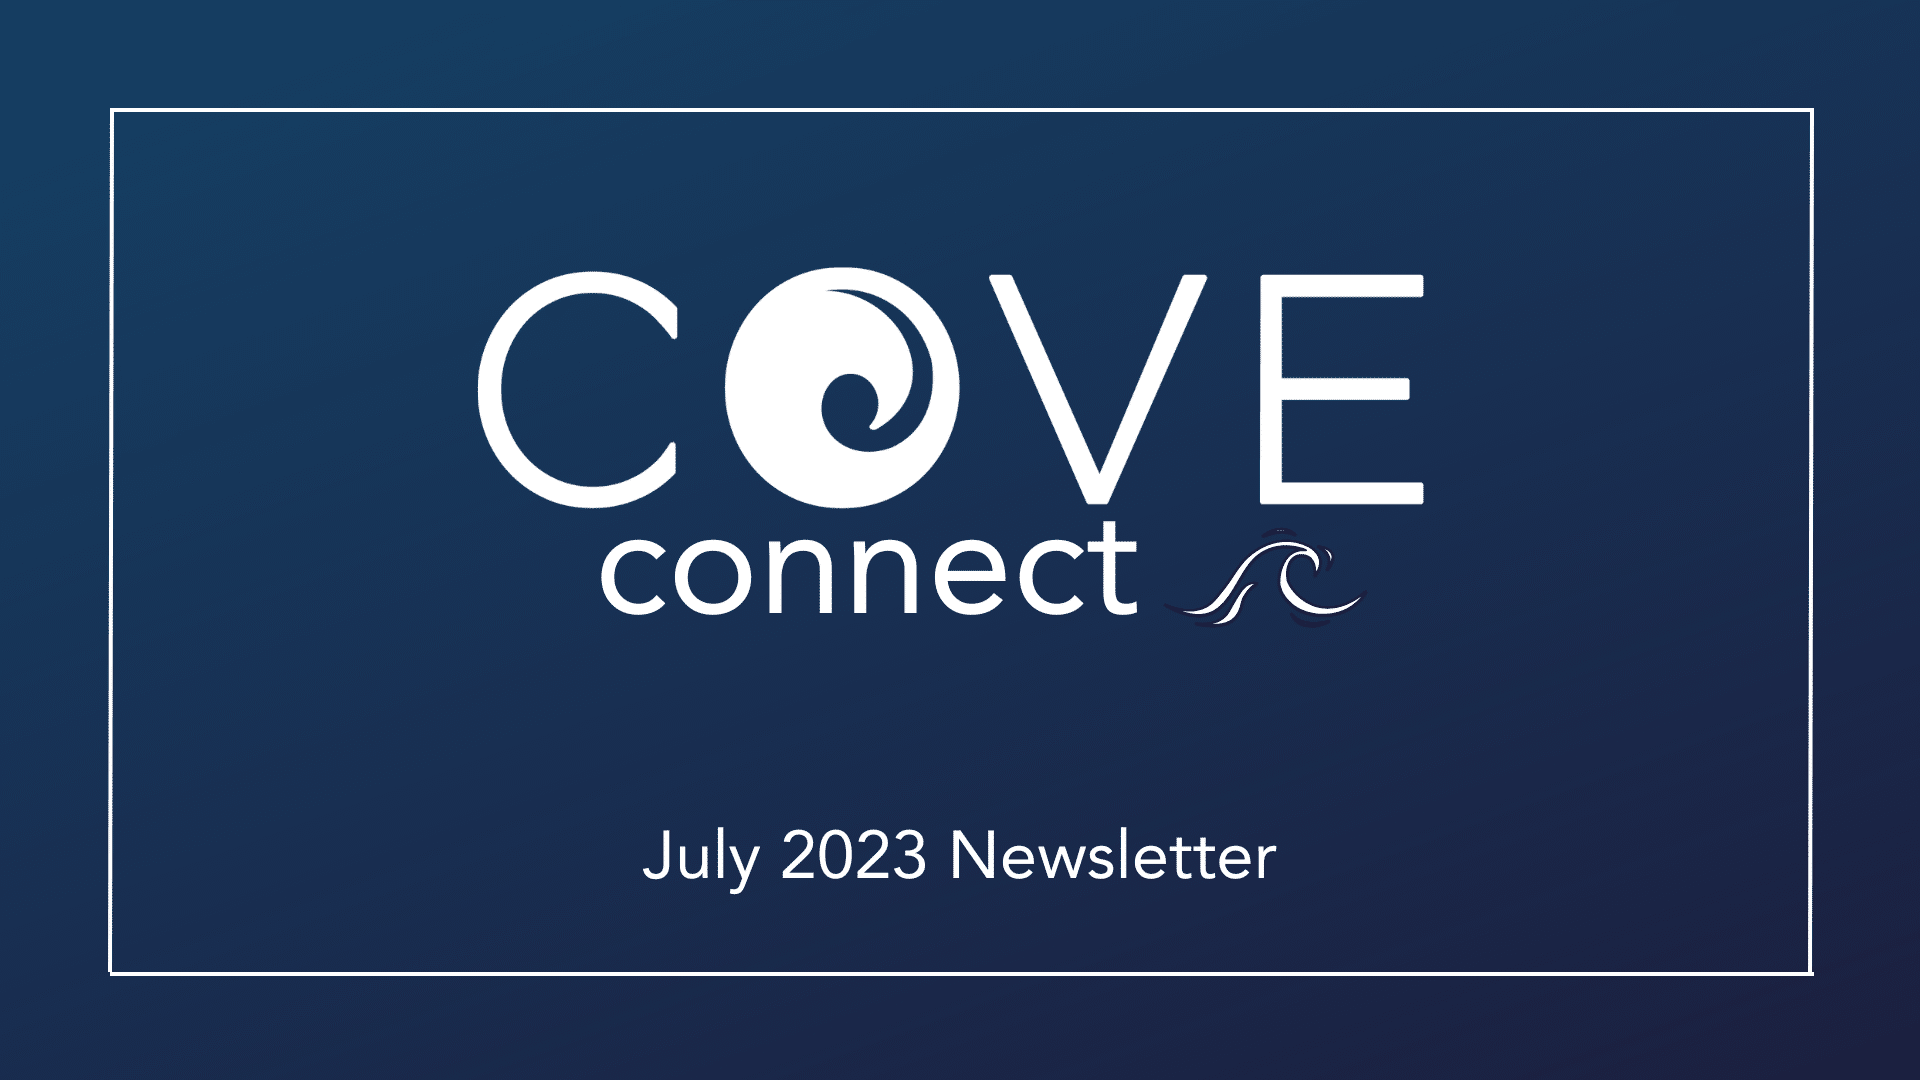 COVE Connect | July 2023